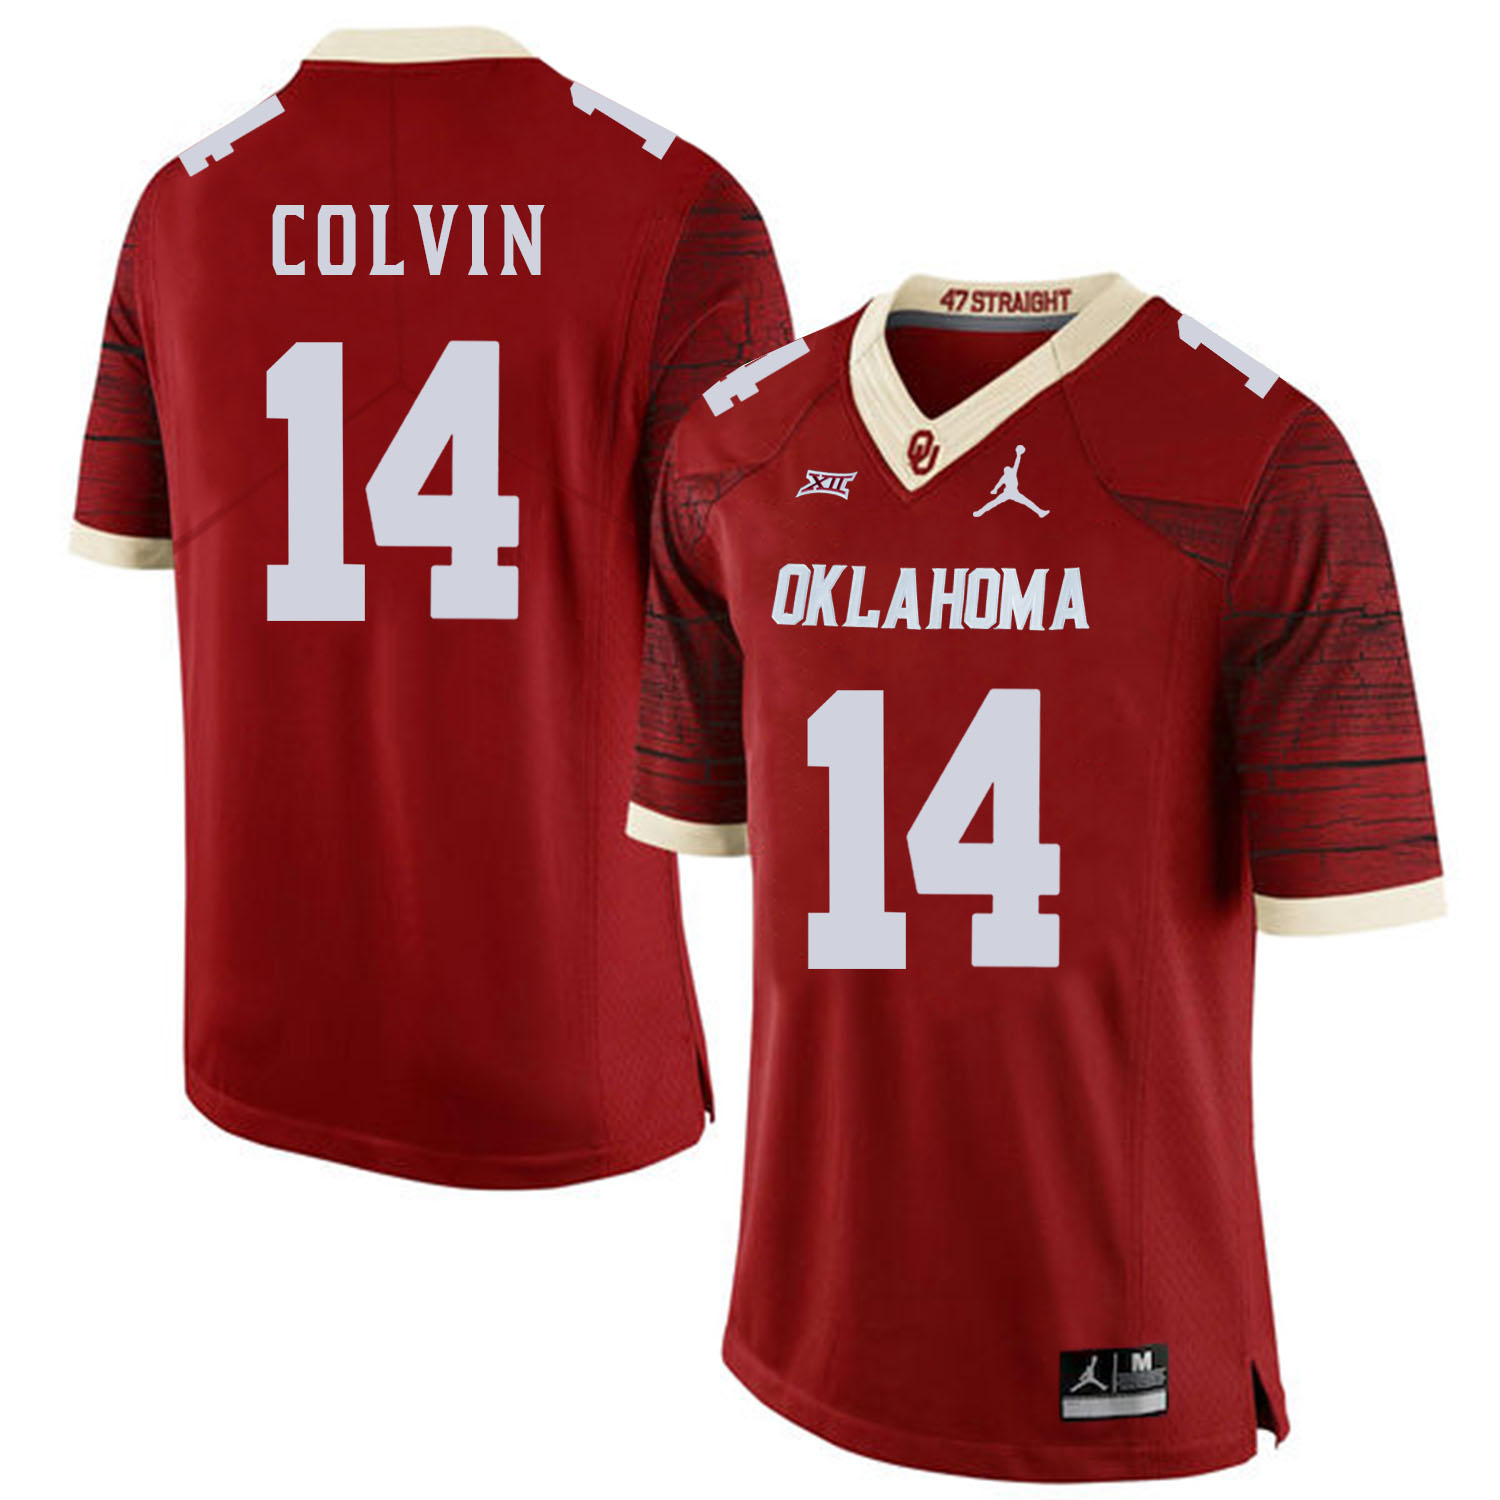 Oklahoma Sooners 14 Aaron Colvin Red 47 Game Winning Streak College Football Jersey - Click Image to Close